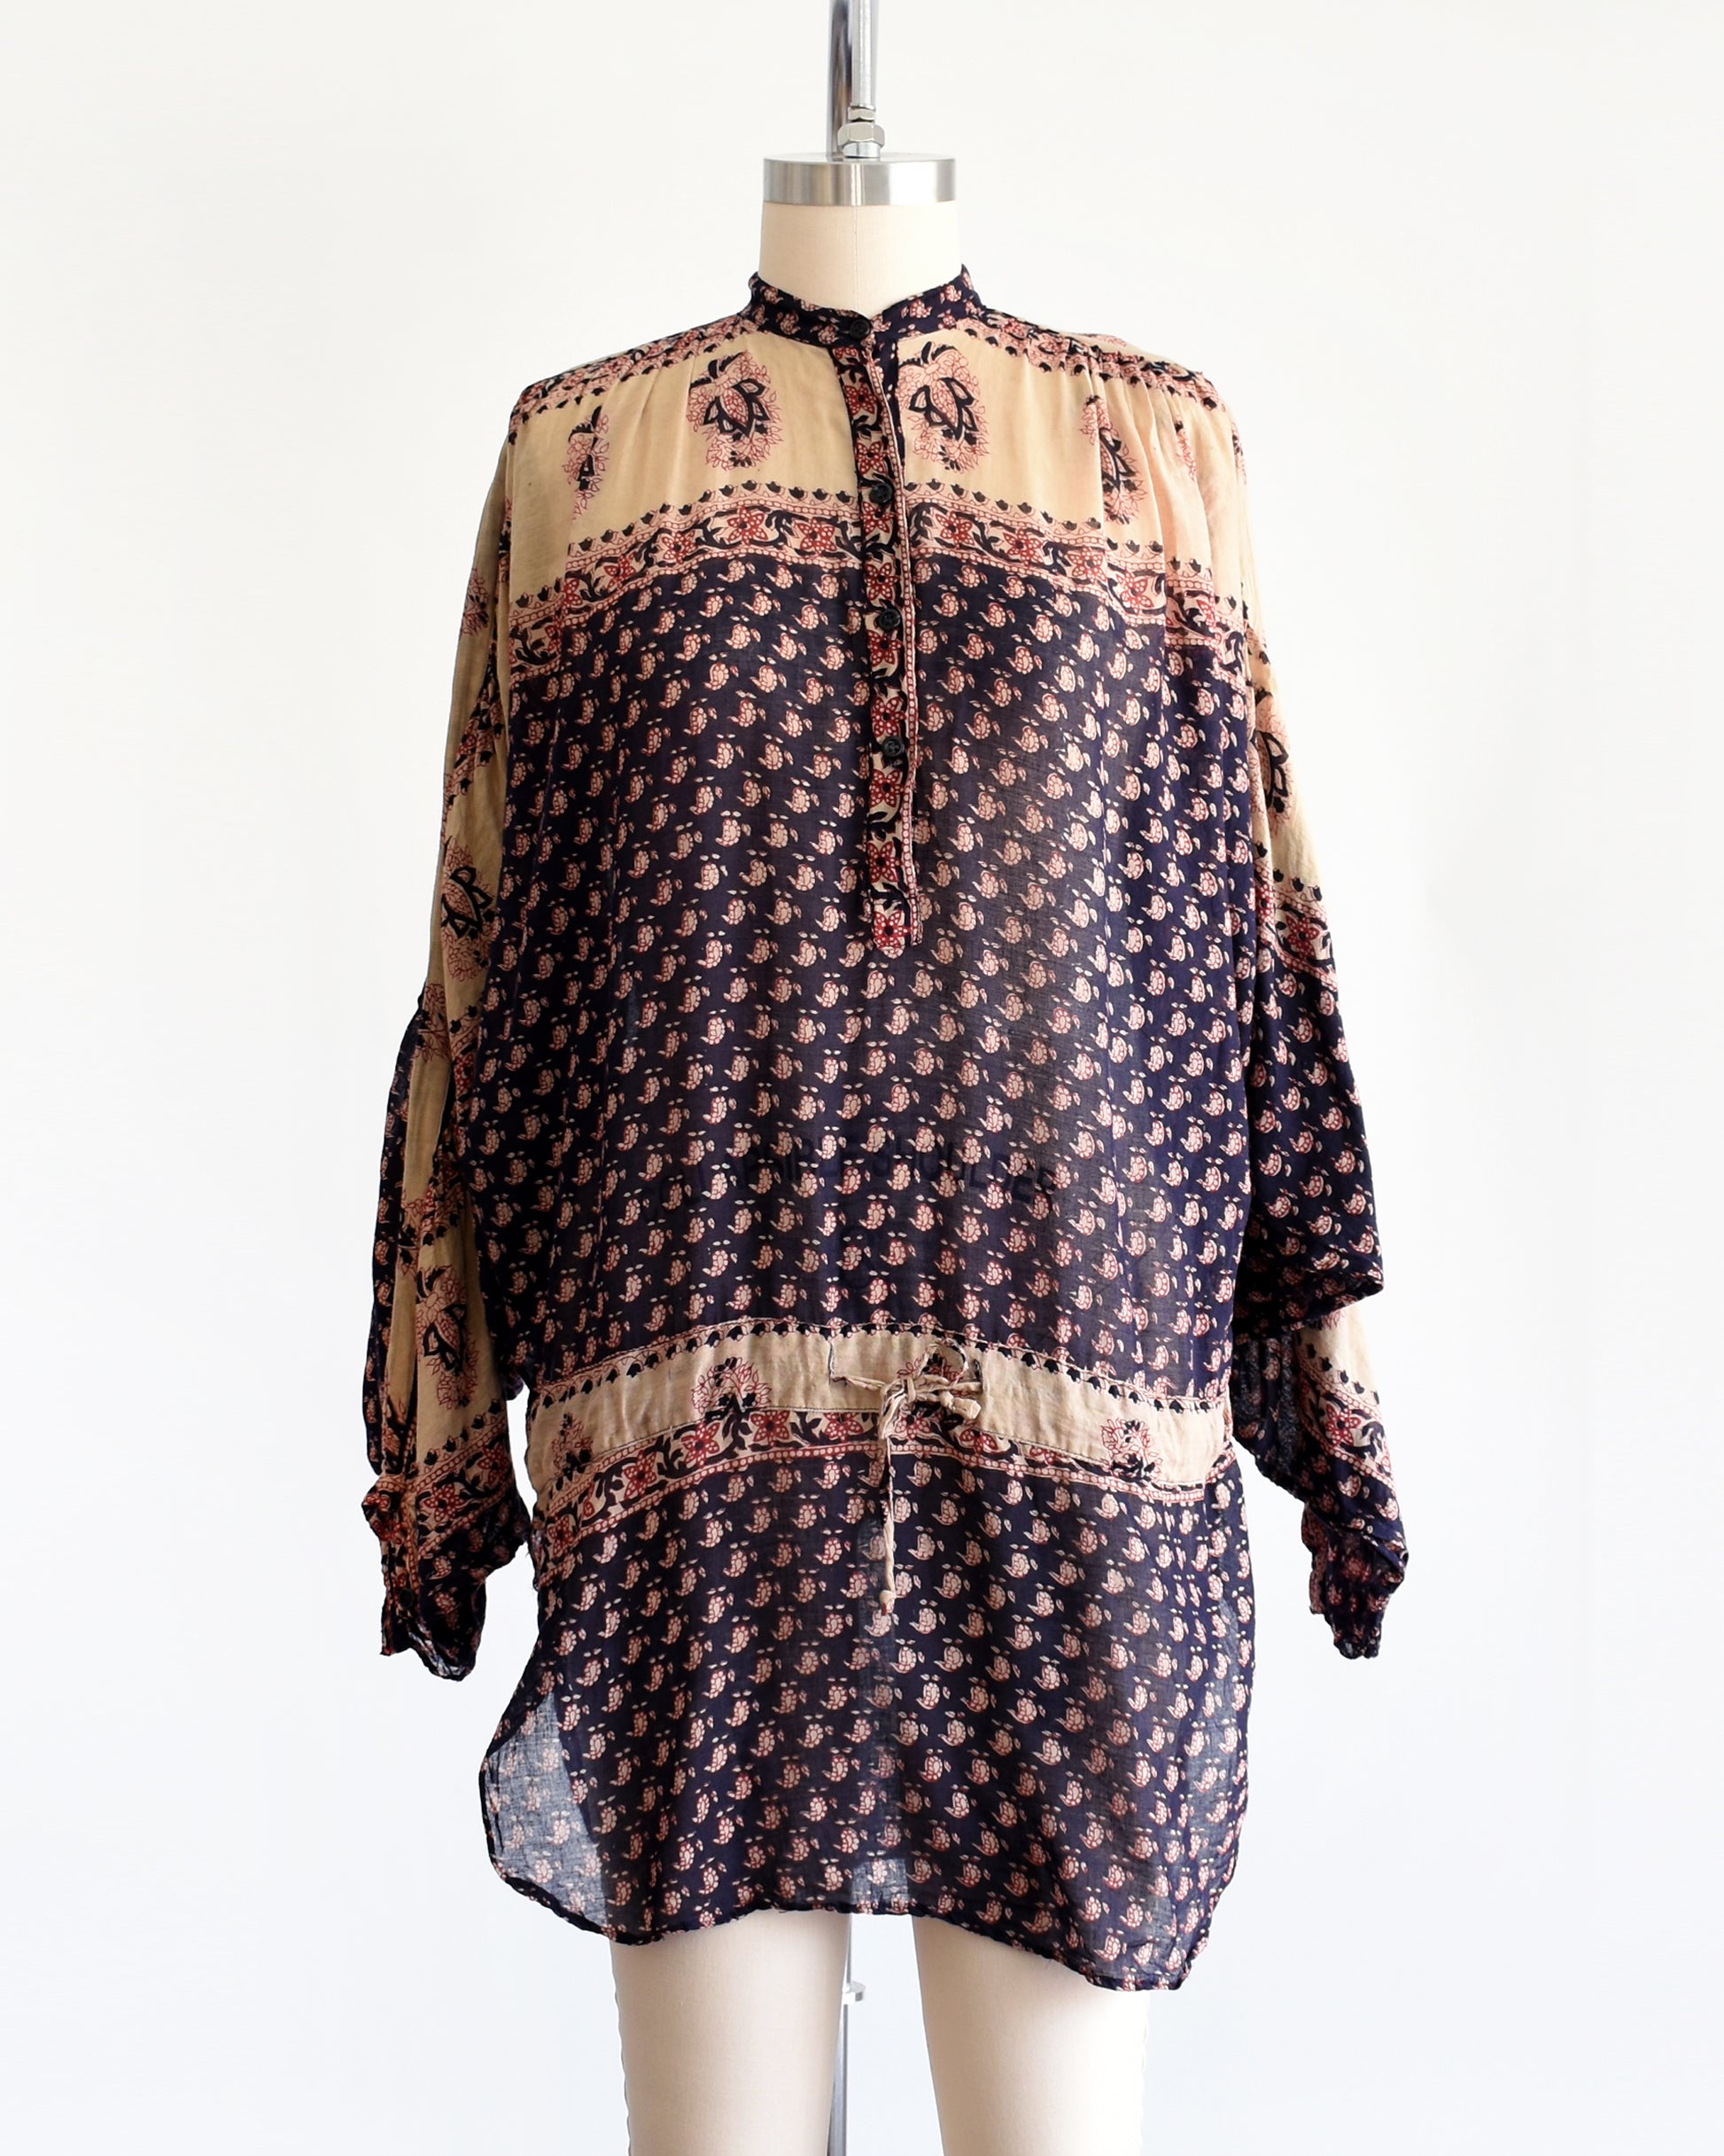 A vintage 1970s Indian cotton tunic made from thin, gauzy navy blue and light tan cotton with a red and navy floral block print